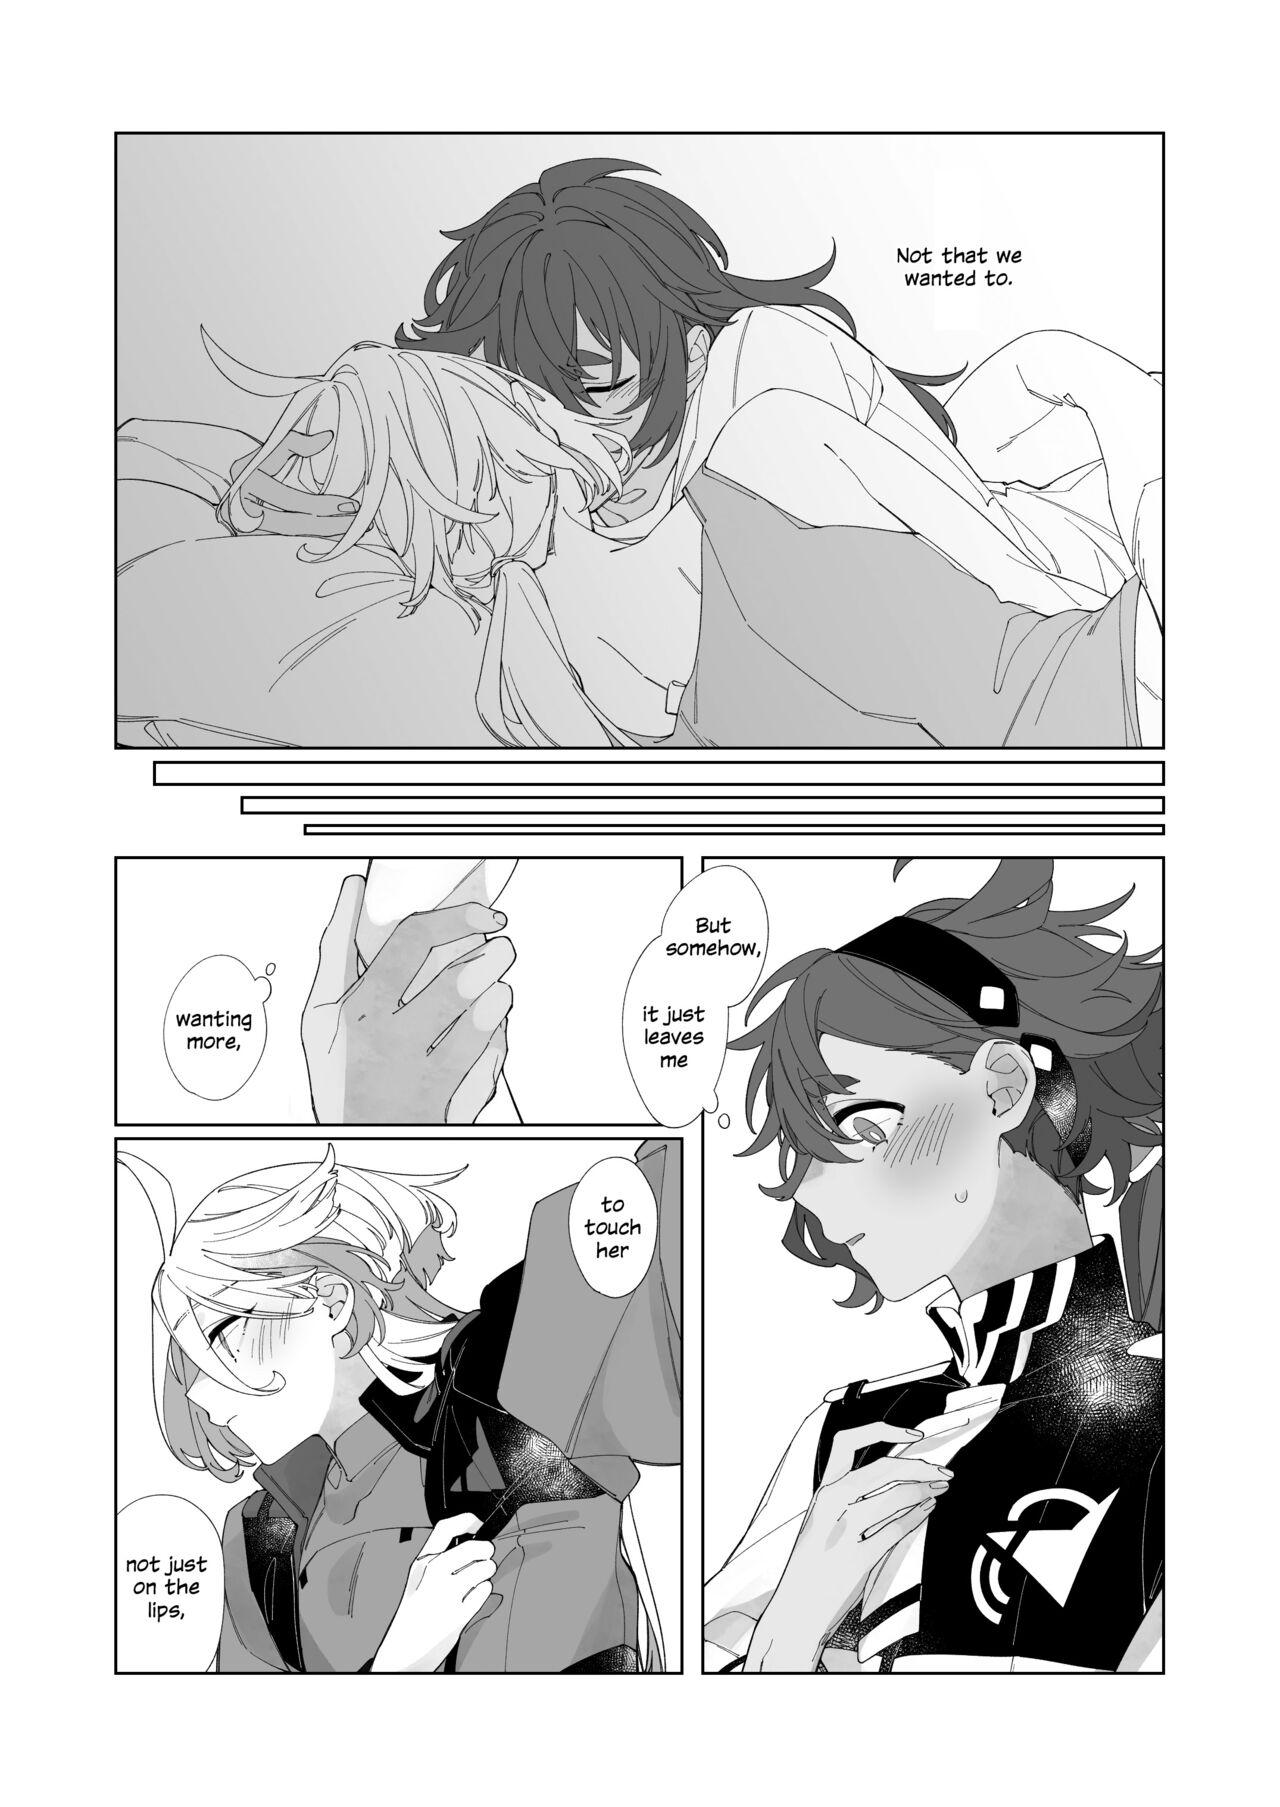 Super Kiss no Ato Nani ga Shitai? | After Kissing, What Else Do You Want to Do? - Mobile suit gundam the witch from mercury Phat - Page 9